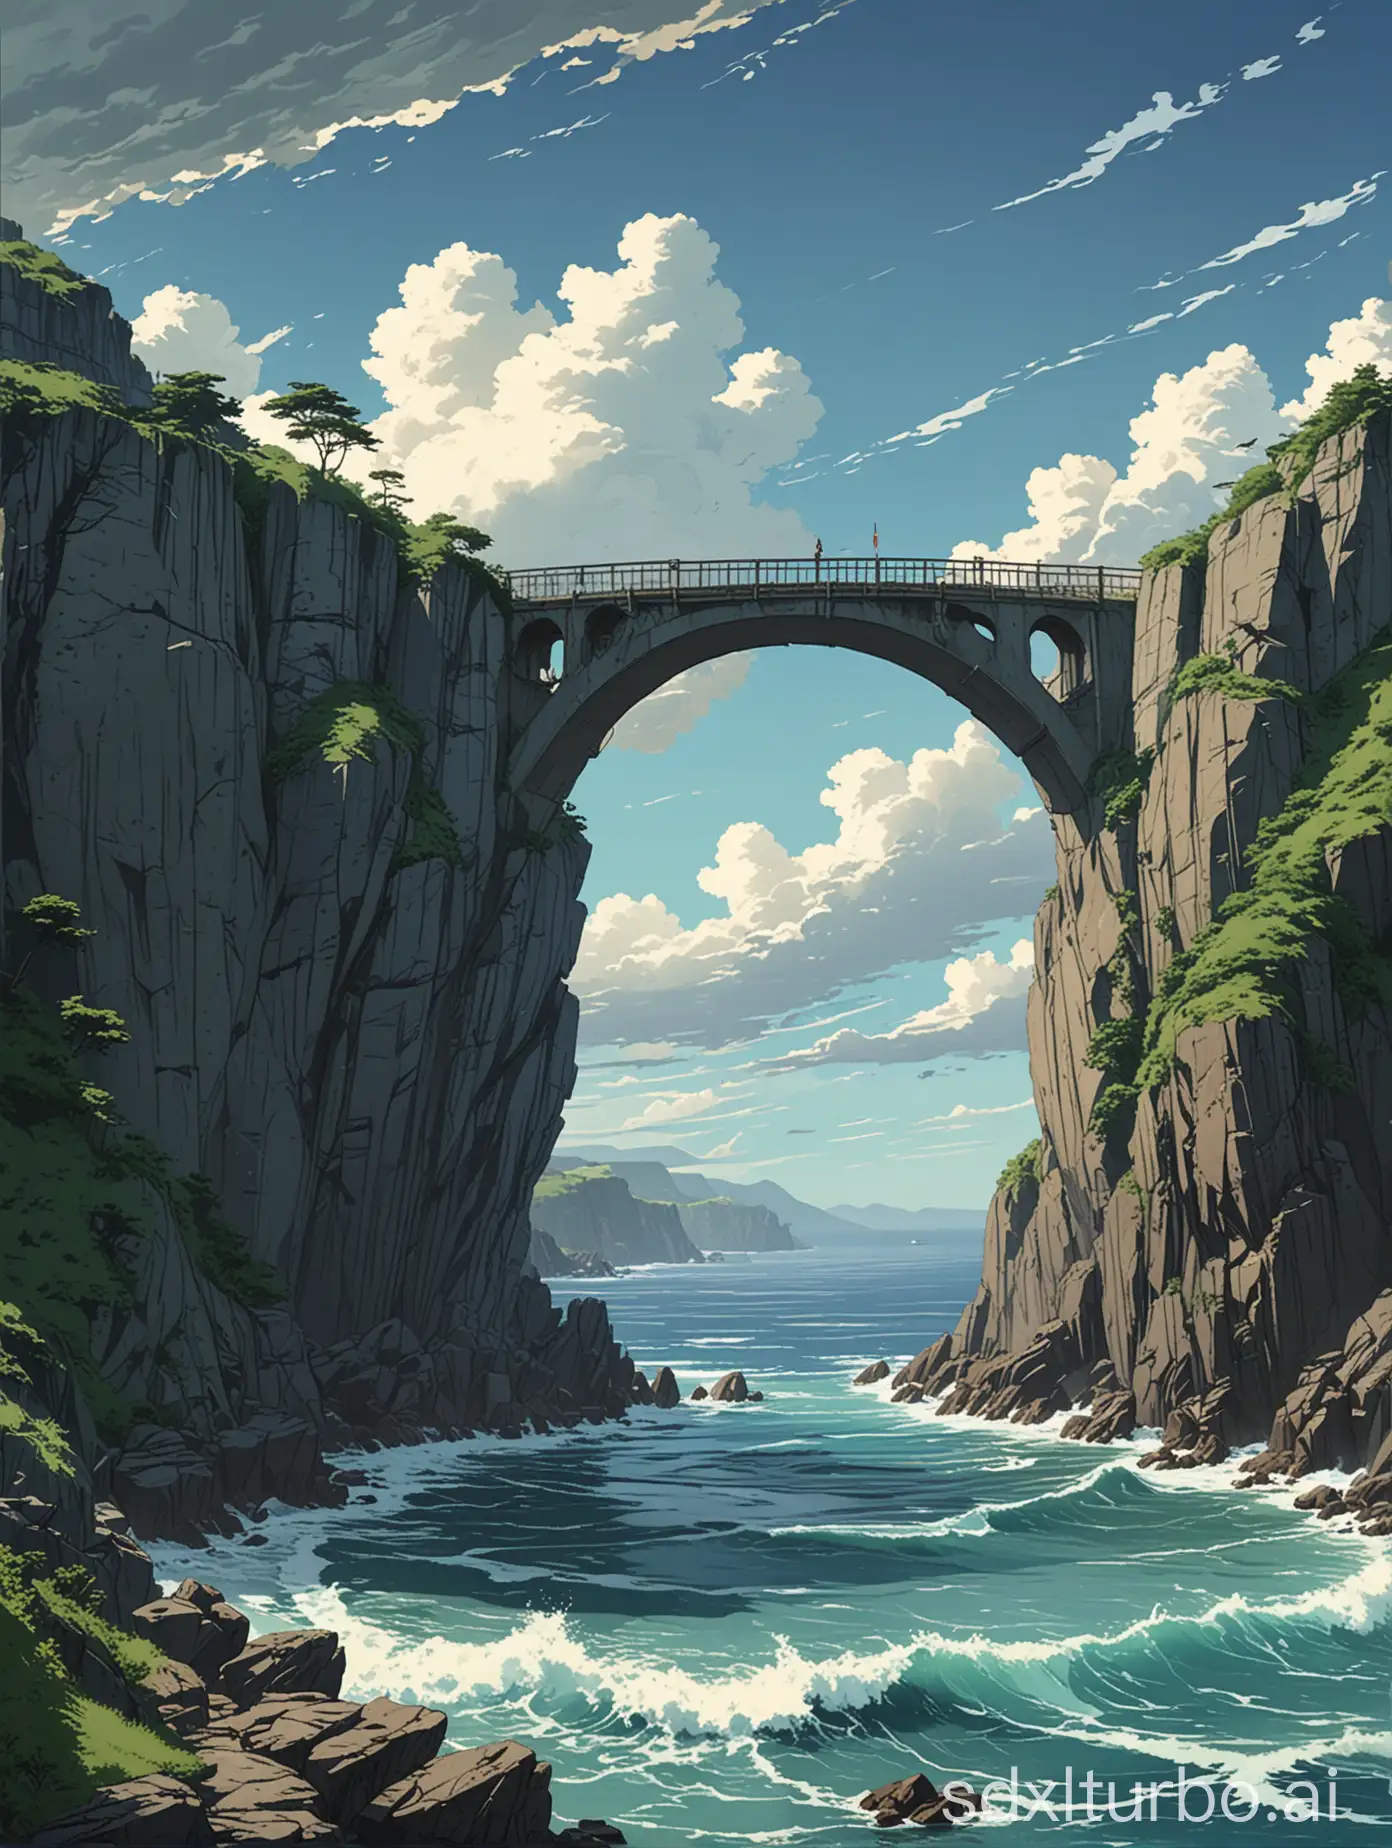 Studio ghibli anime style, A scenic coastal landscape featuring a tall concrete arch bridge extending over a deep ravine. In the background, rugged cliffs line the shoreline, with waves crashing against them. The scene is framed by rolling hills and a mountainous horizon, set under a partly cloudy sky. The ocean stretches to the right with a mix of light and dark blue hues.